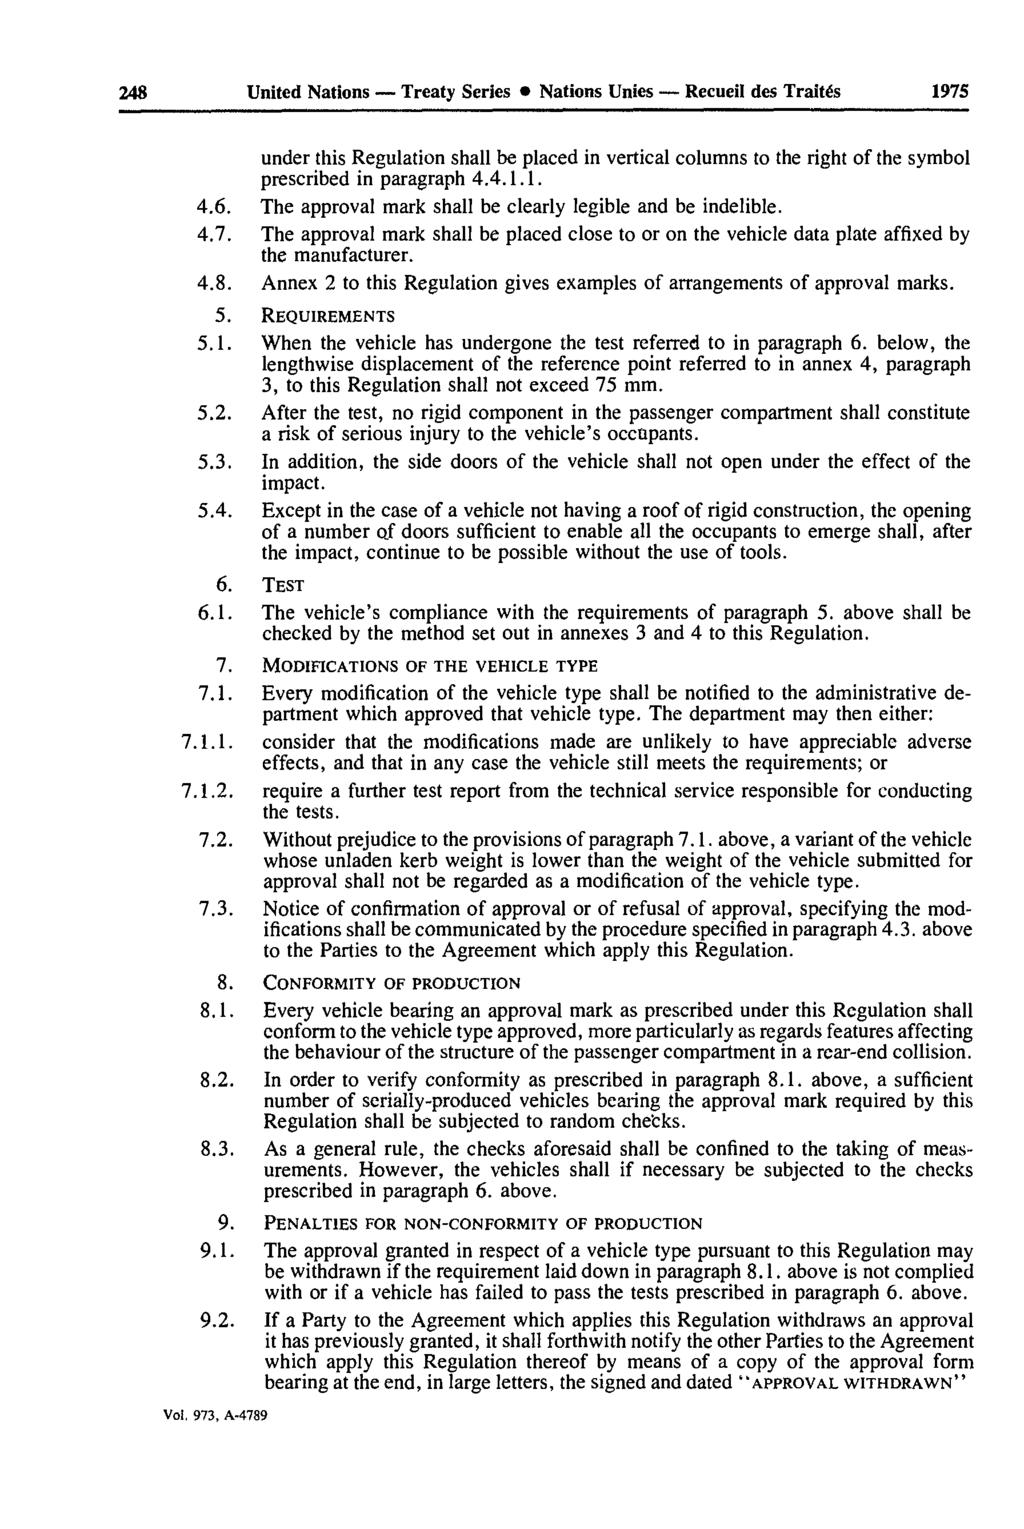 248 United Nations Treaty Series Nations Unies Recueil des Traités 1975 under this Regulation shall be placed in vertical columns to the right of the symbol prescribed in paragraph 4.4.1.1. 4.6.